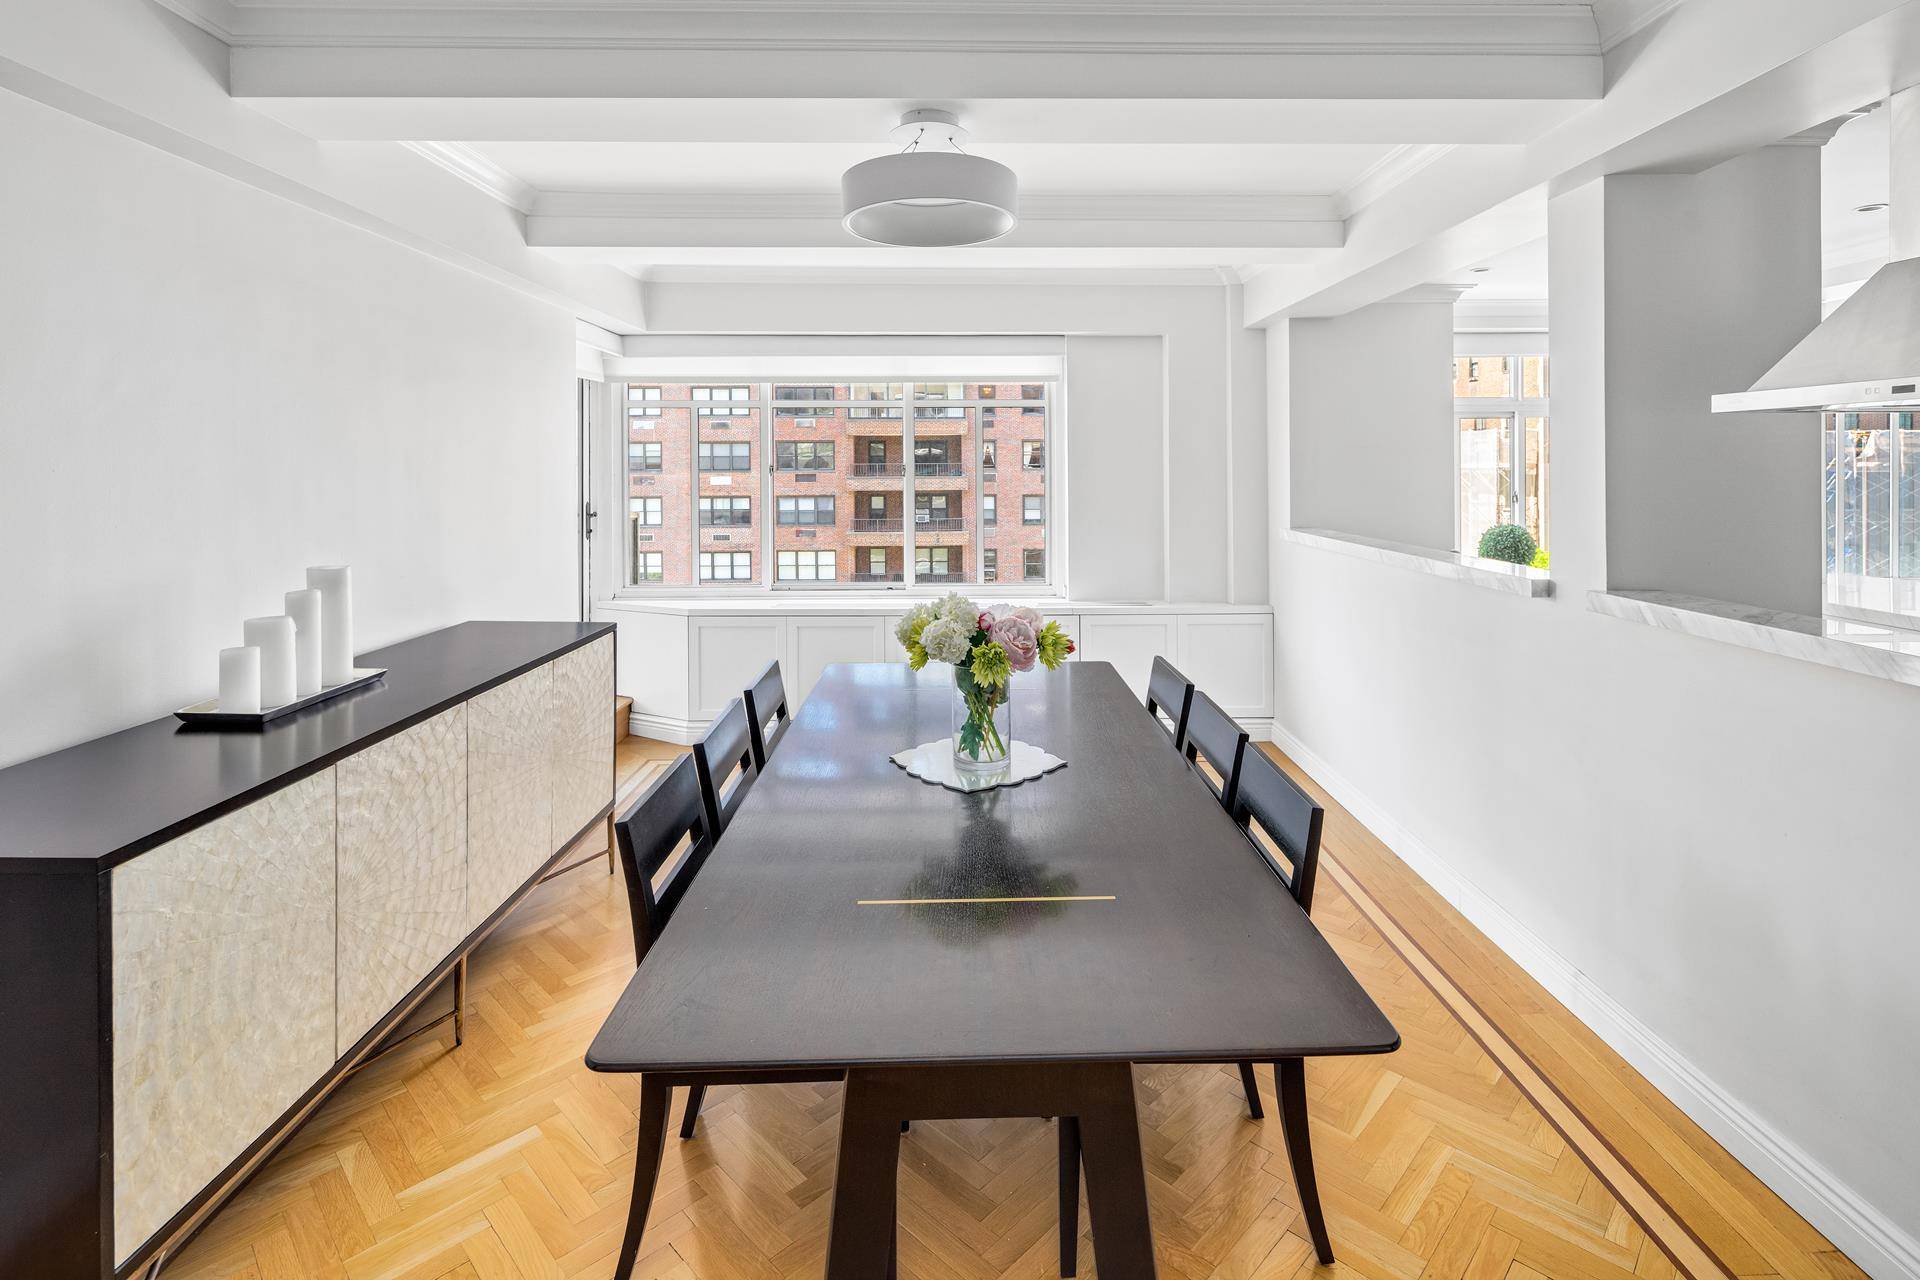 Introducing Residence 7A B at 715 Park Avenue A rare opportunity to own a triple mint condition 3 bedroom, 3 bathroom condo with reasonable carrying costs and private outdoor space ...